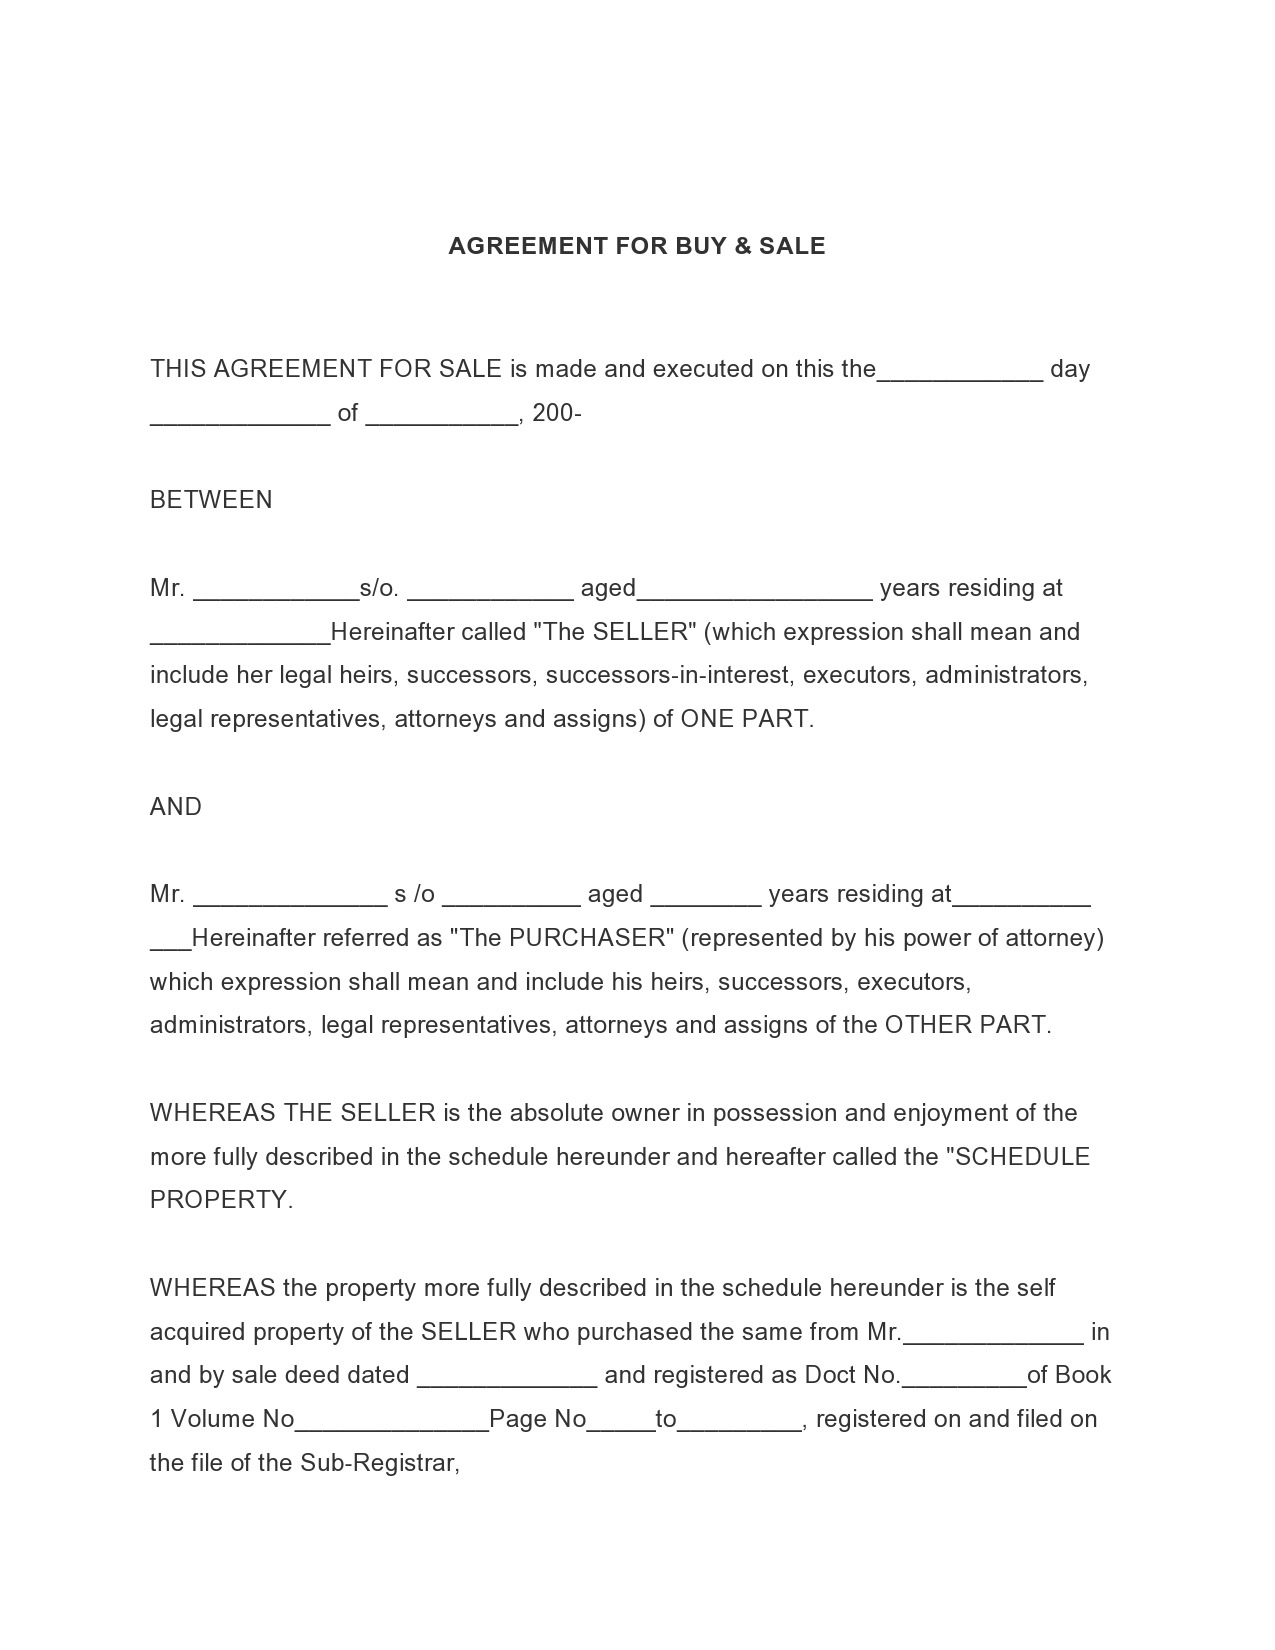 Free buy sell agreement 23